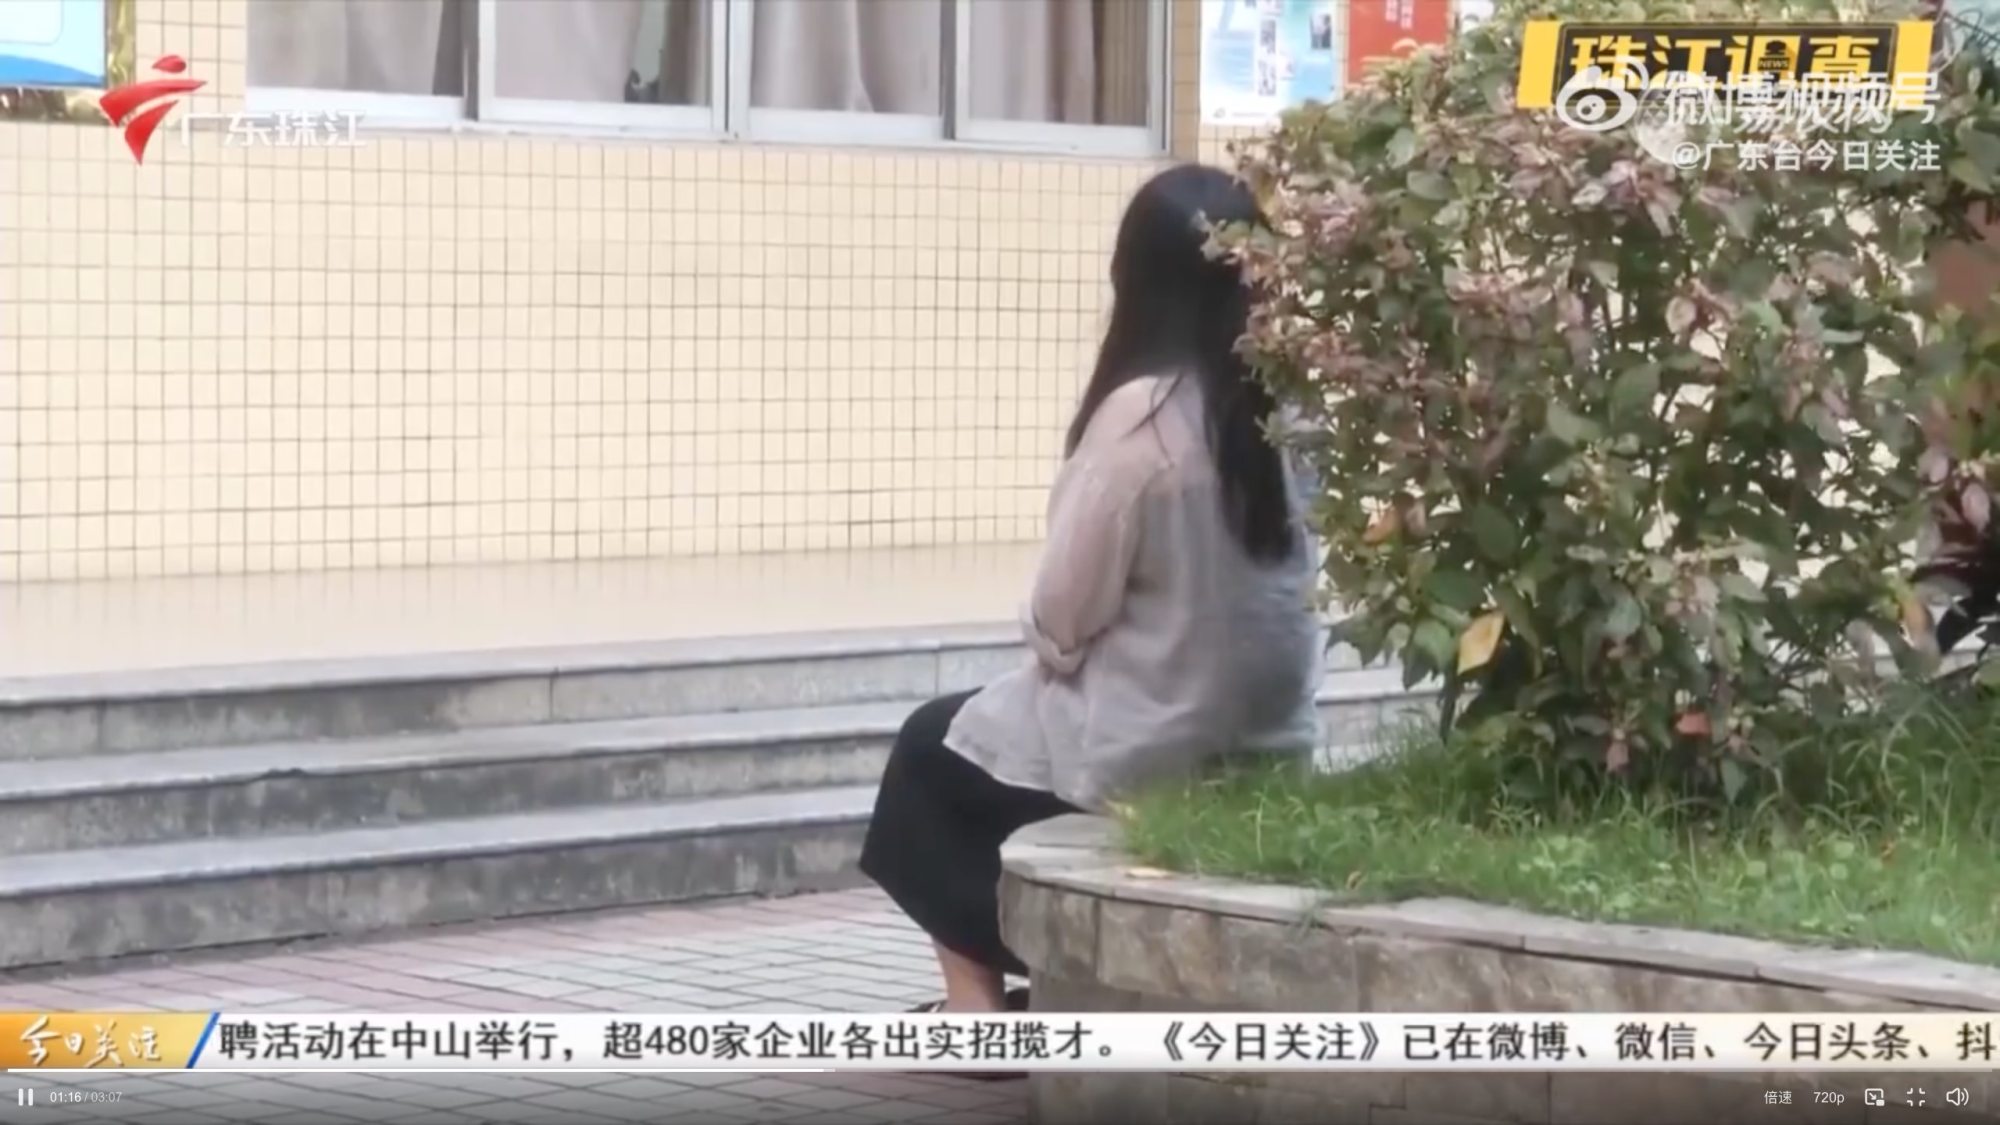 The unidentified primary school teacher has made an apology to the students she disciplined and says she realises now that she made a mistake. Photo: Weibo